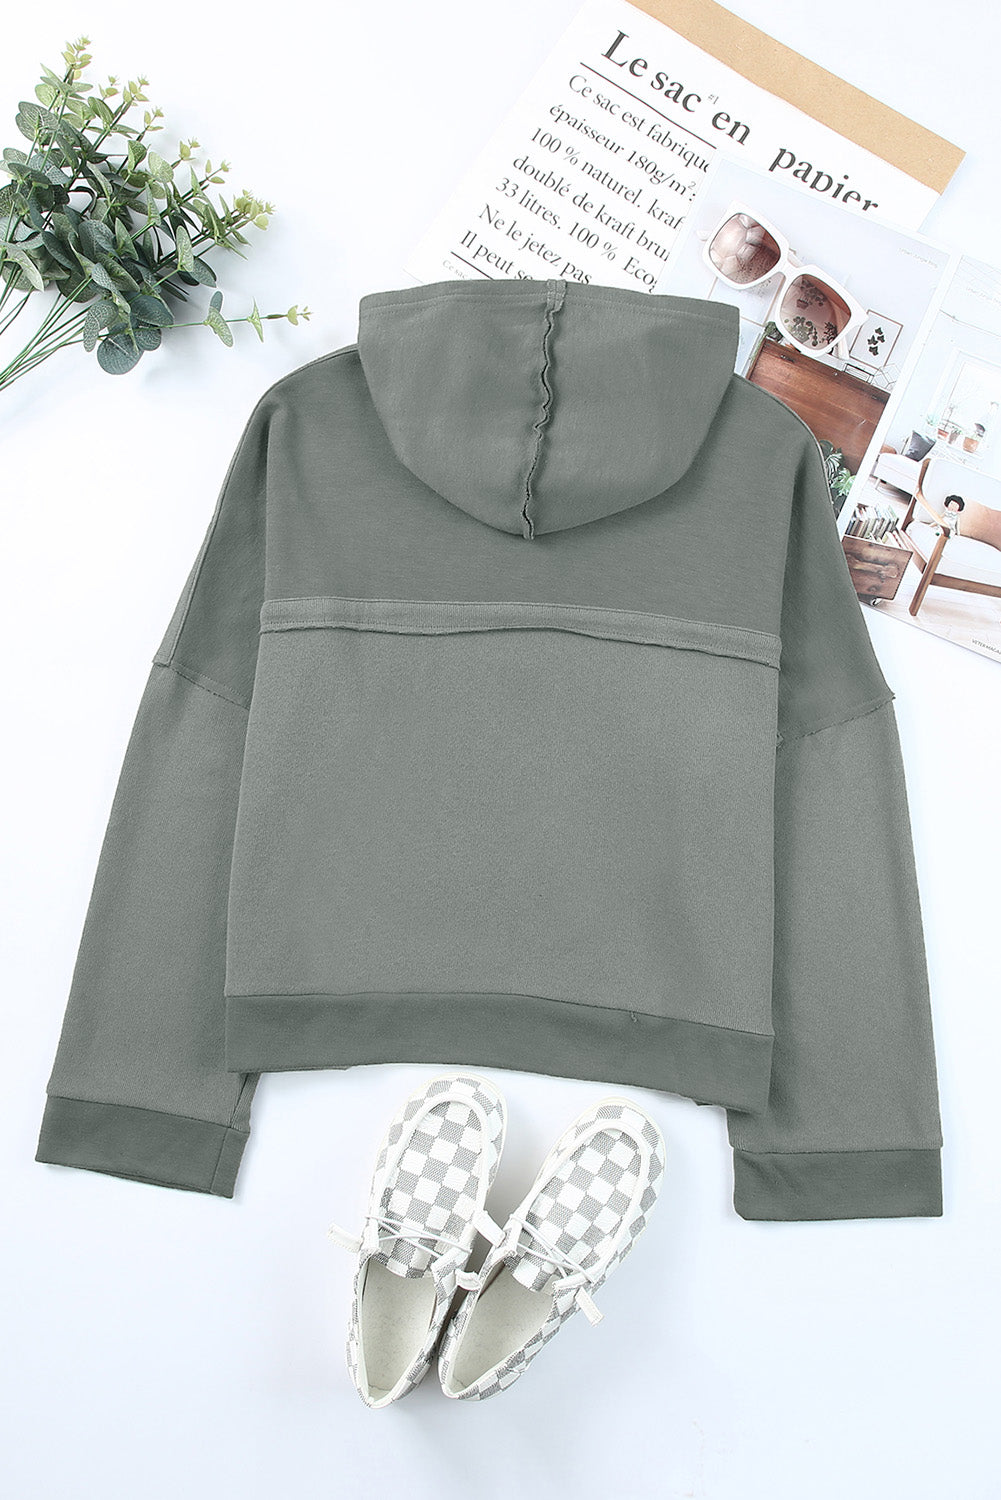 Women's Quarter-Button Exposed Seam Dropped Shoulder Hoodie